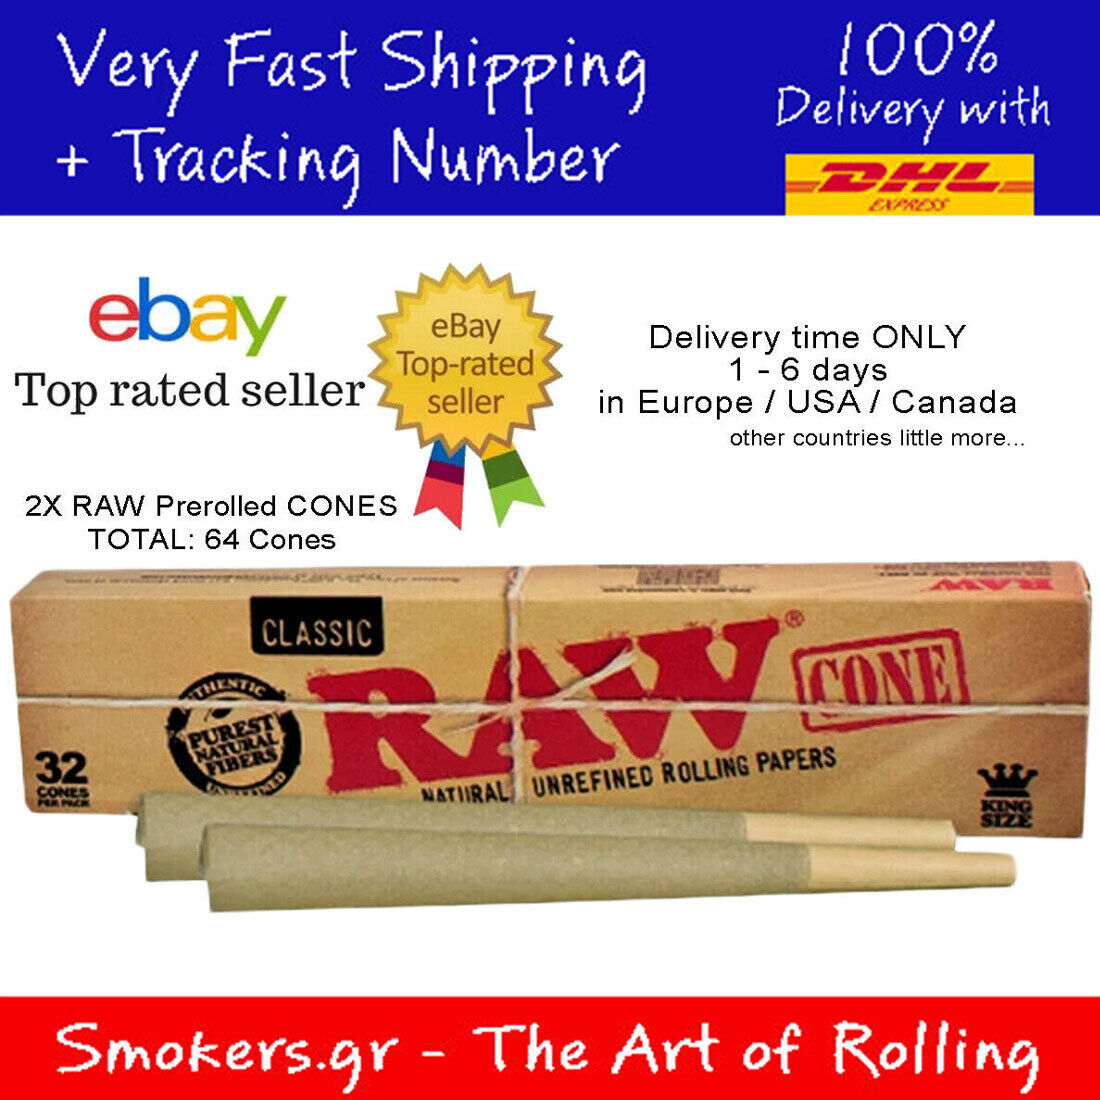 2x RAW Classic Pre-Rolled Cones King Size - Pack of 32 Cones Total: 64 Cones